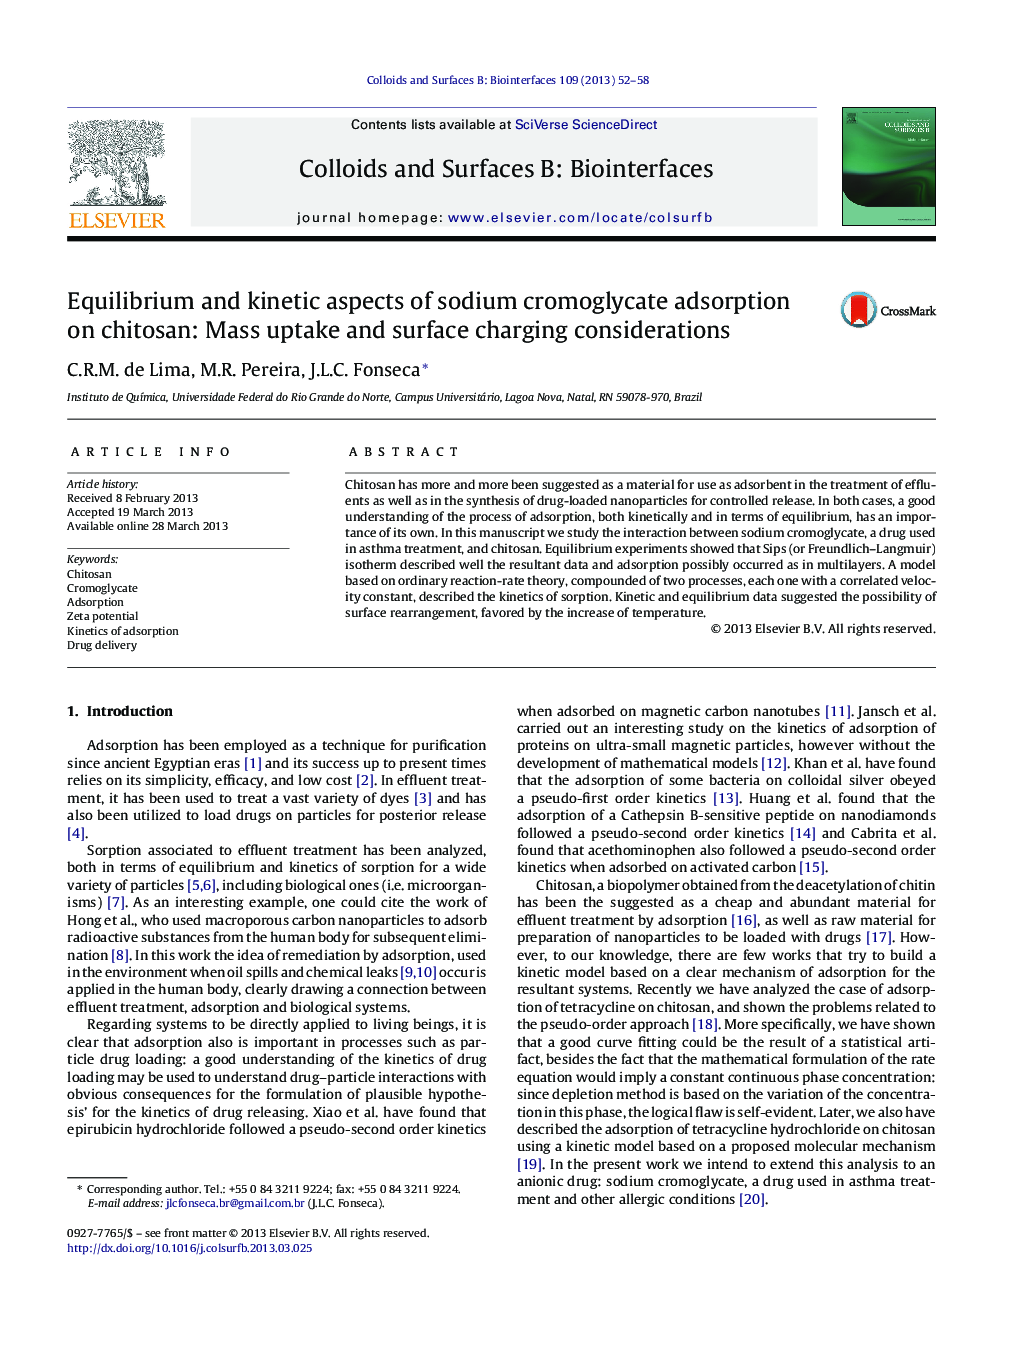 Equilibrium and kinetic aspects of sodium cromoglycate adsorption on chitosan: Mass uptake and surface charging considerations